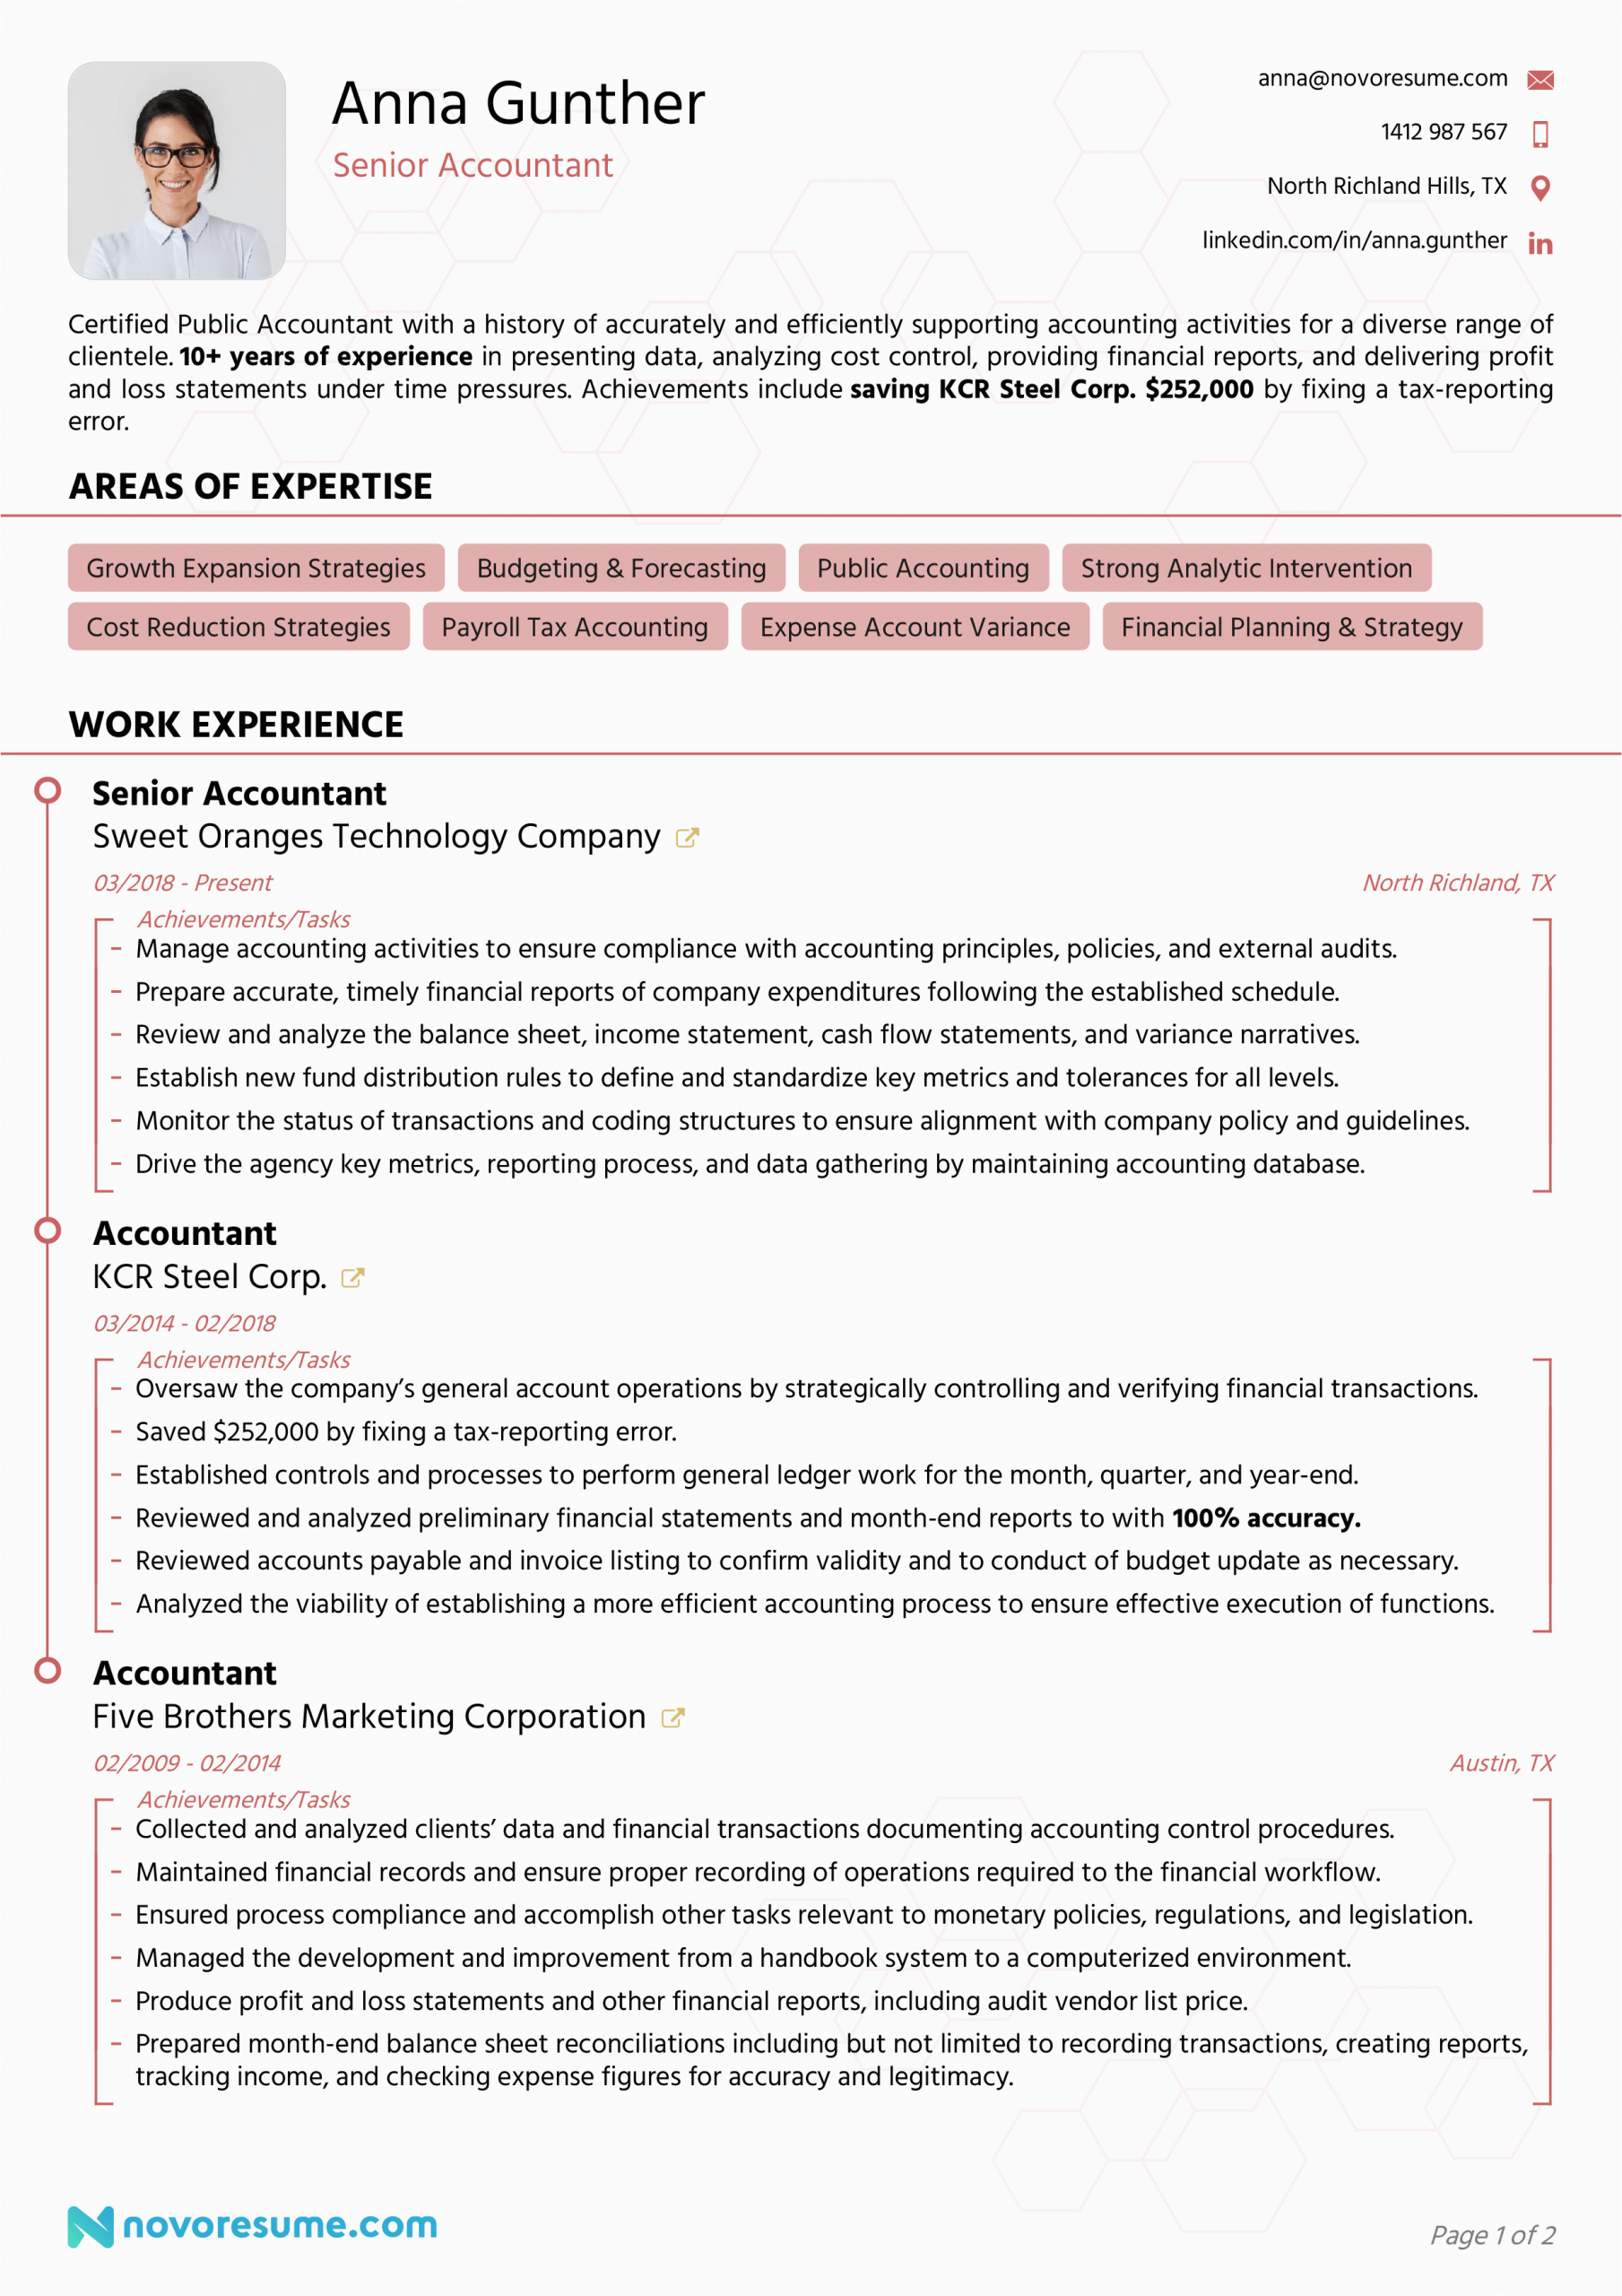 Sample Of Functional Resume for Accountant Accountant Resume Writing Guide & Example for 2021